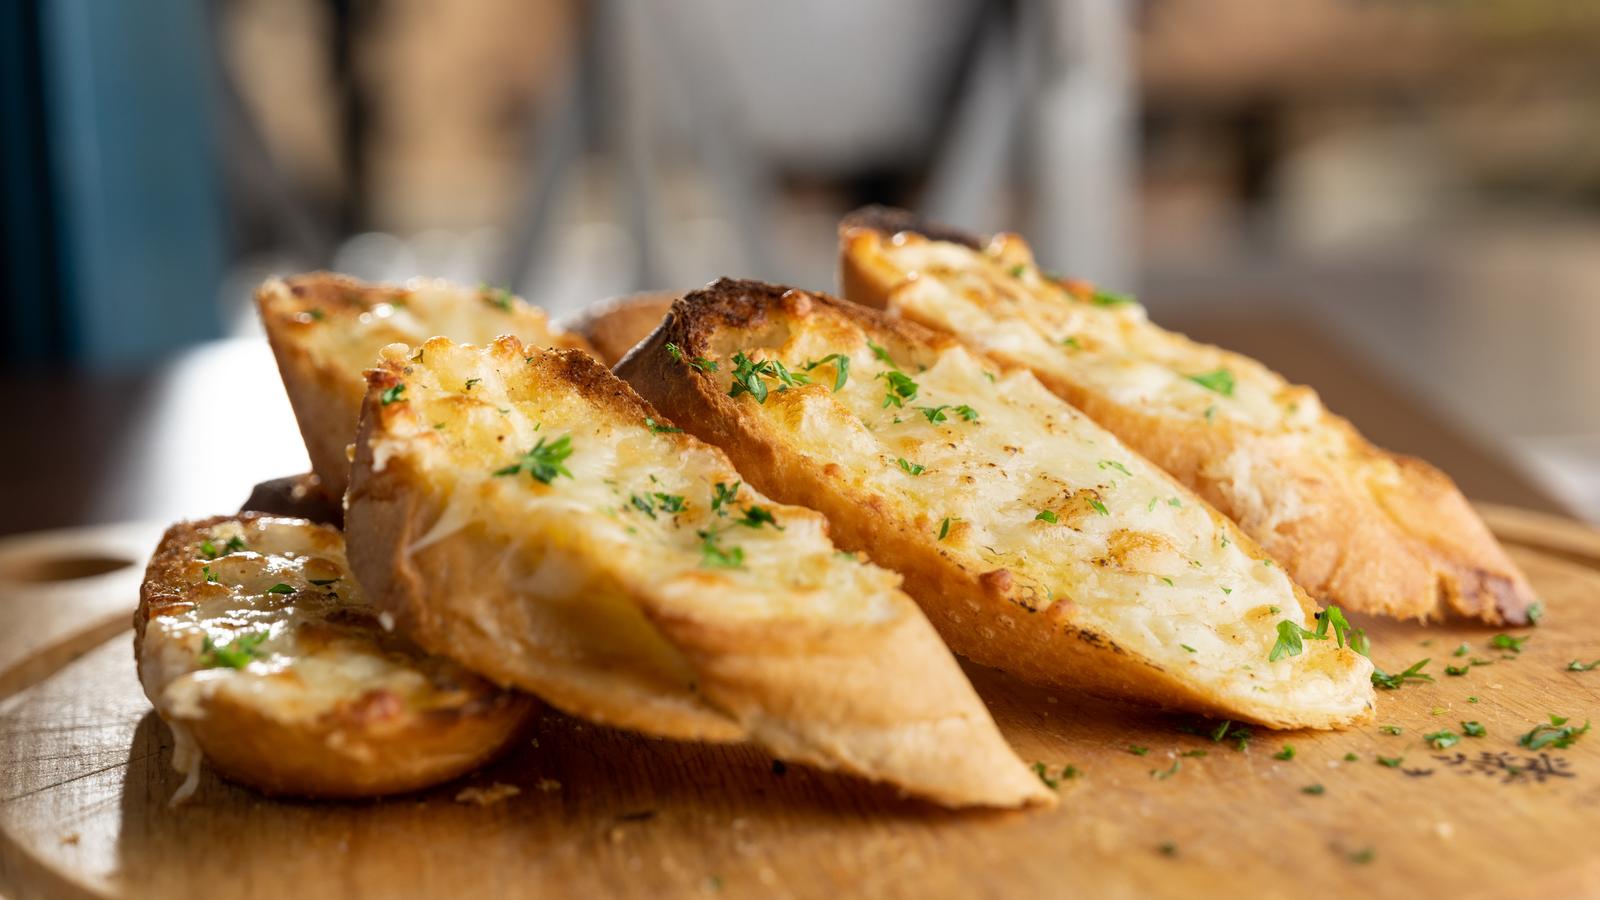 🥩 Can You Grab the Correct Ingredients to Make This Recipe? Garlic bread